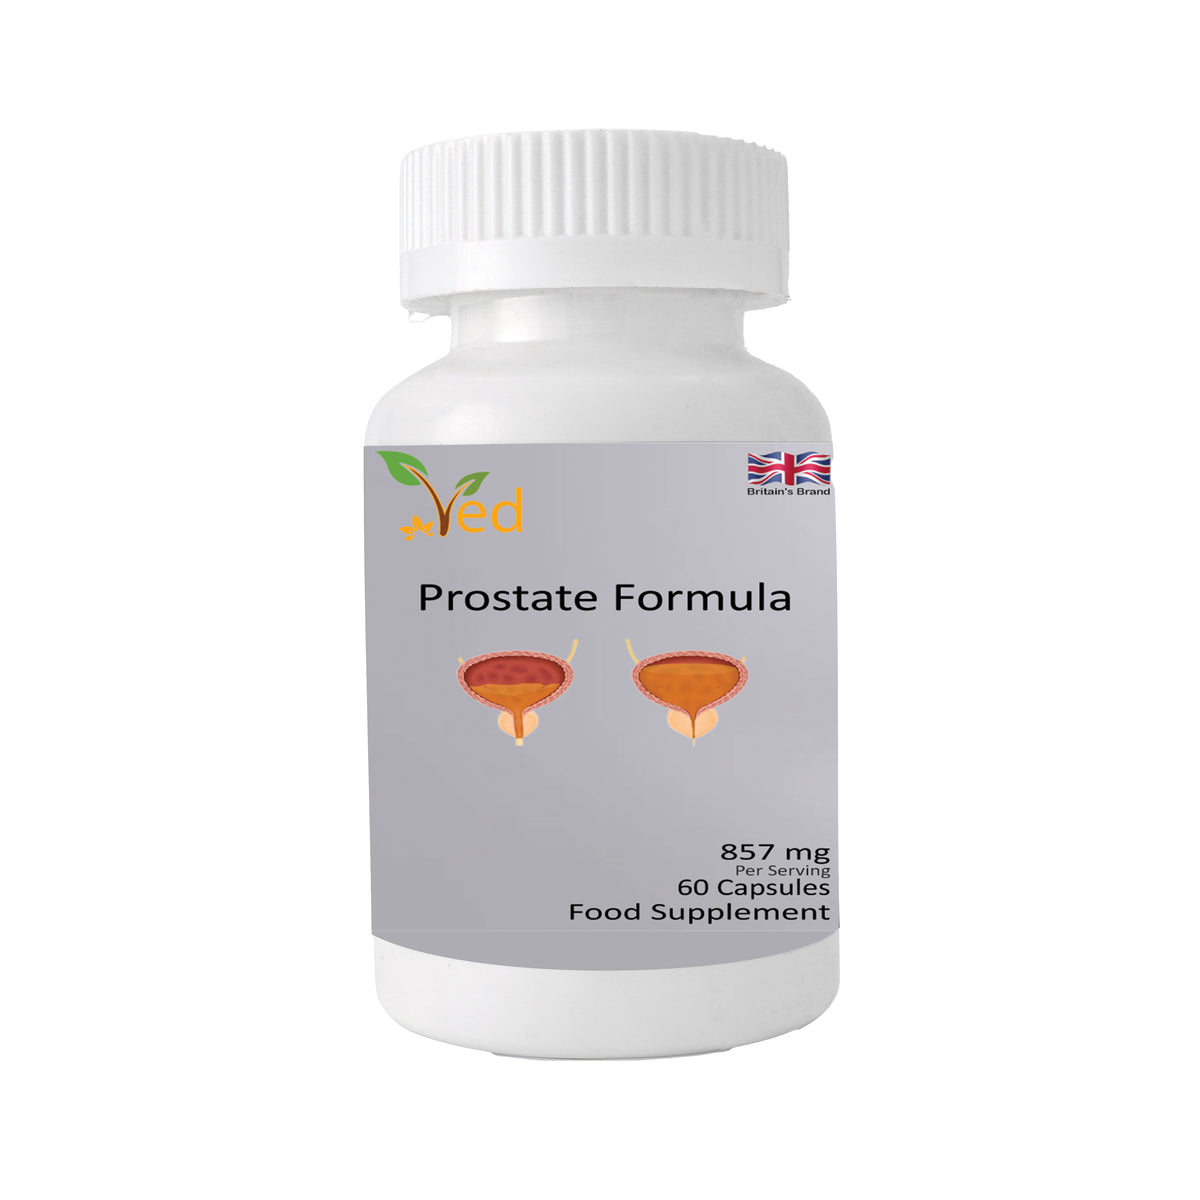 Ved Prostate Formula, Enriched with Saw Palmetto, Plant Extracts, Vitamin B6, Zinc and Selenium 857 mg per Serving 60 Capsules (30 Days Supply)